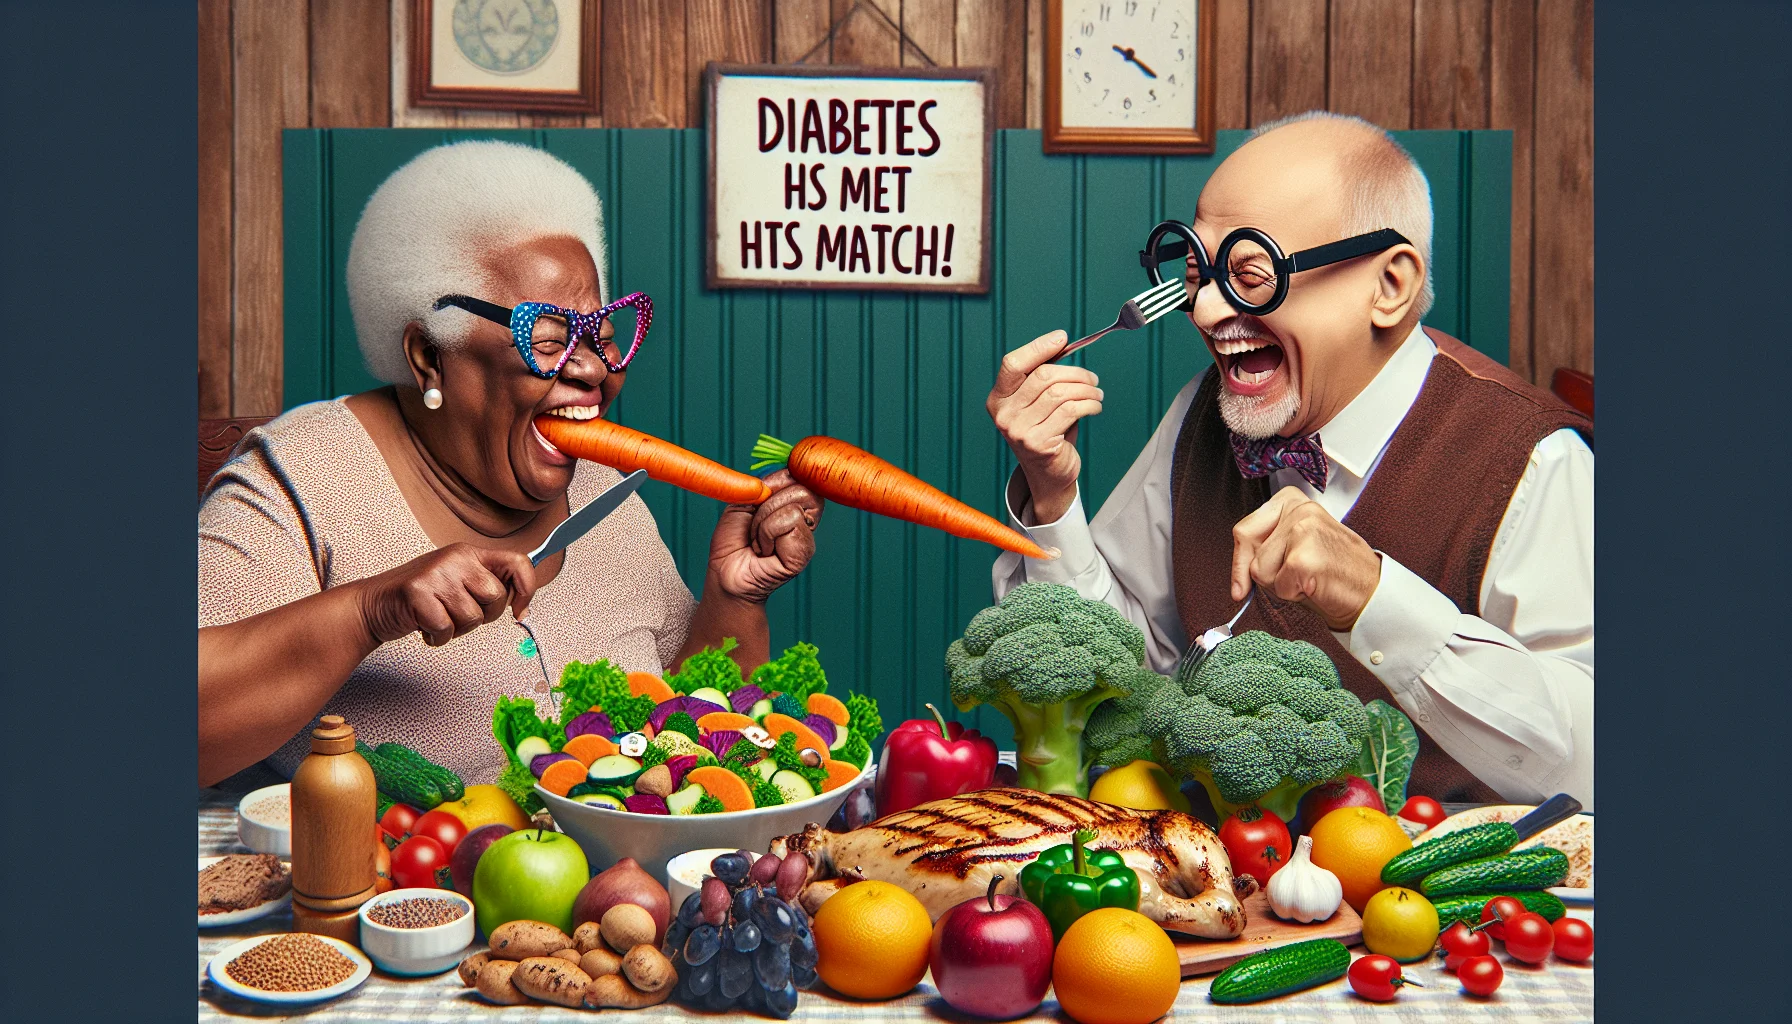 Create a humorous and realistic pictorial representation of a heart-healthy diabetic diet. In this image, two elderly individuals, a Black woman and a Caucasian man, sit at a table overflowing with colorful fruits, vegetables, grilled chicken, and whole grains. The woman wields a large carrots like a magic wand, attempting to enchant her chunky salad, while the man humorously uses broccoli florets as makeshift eyeglasses. Both of them are laughing heartily, clearly enjoying their quirky mealtime antics. A sign in the background reads, 'Diabetes has met its match!'. The scene underlines the importance of a proper diet in the most comical way.